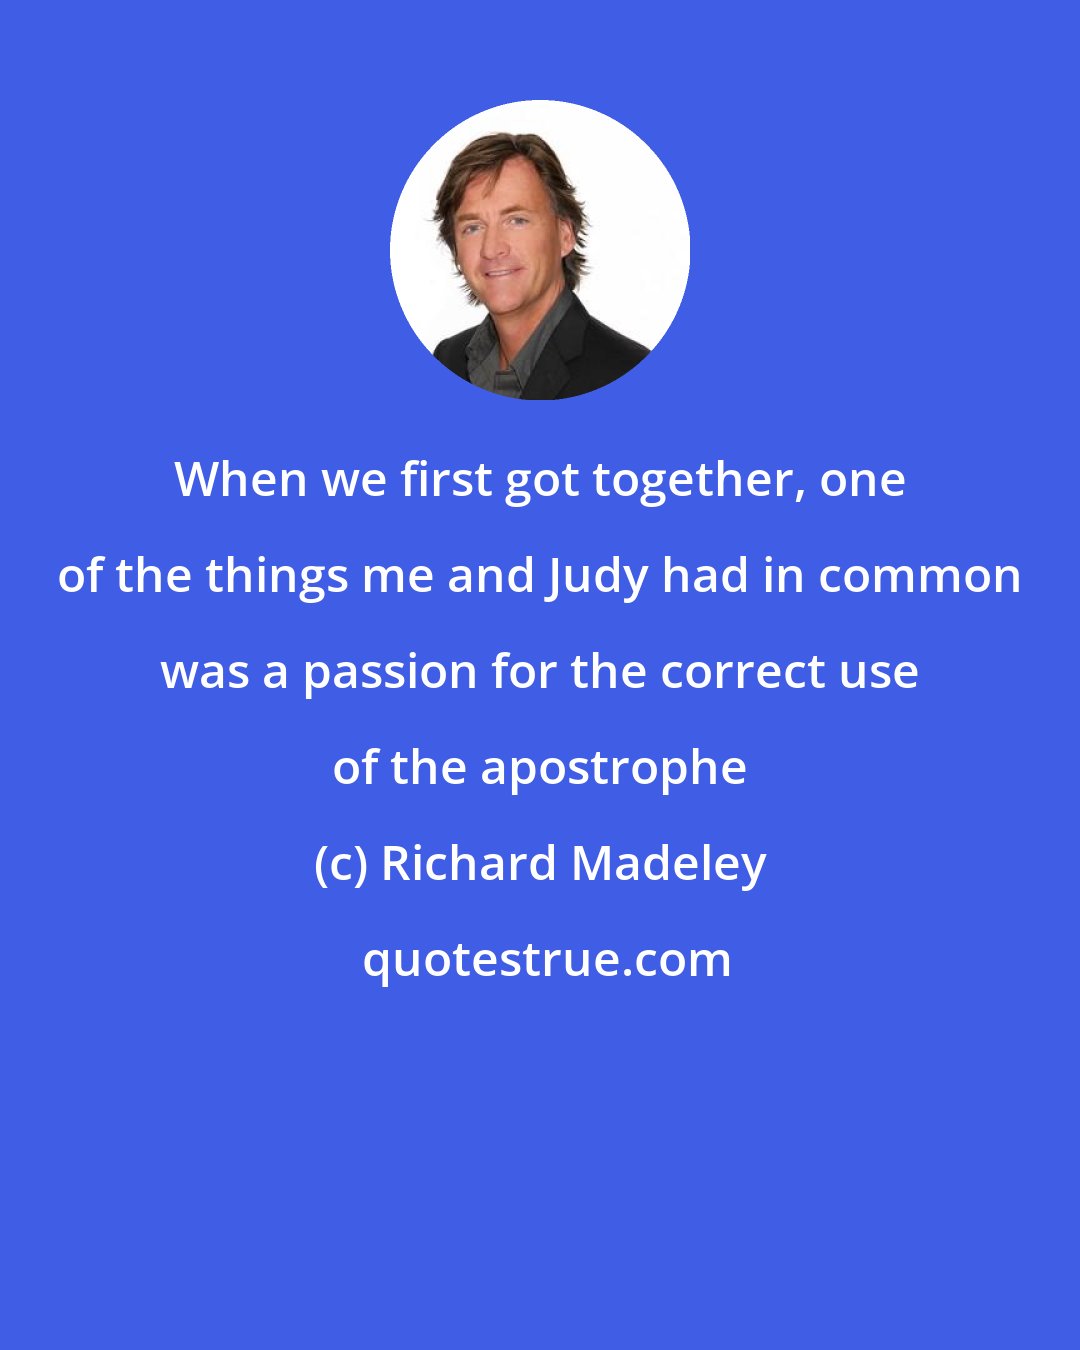 Richard Madeley: When we first got together, one of the things me and Judy had in common was a passion for the correct use of the apostrophe